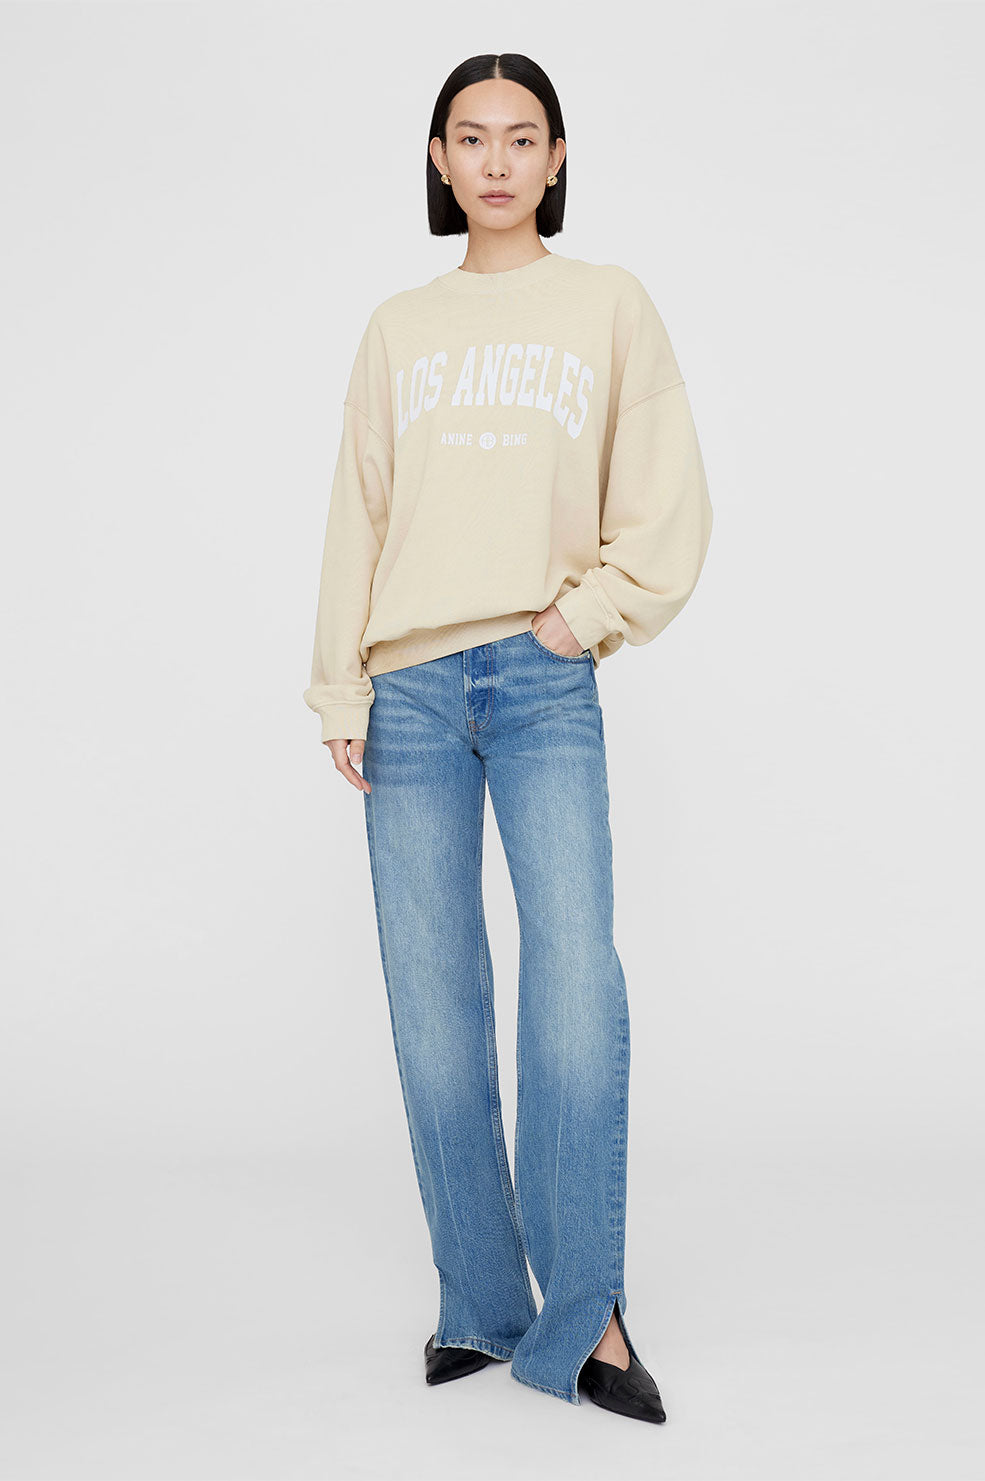 Anine Bing Jaci Sweatshirt Los Angeles in Yellow available at TNT The New Trend Australia.